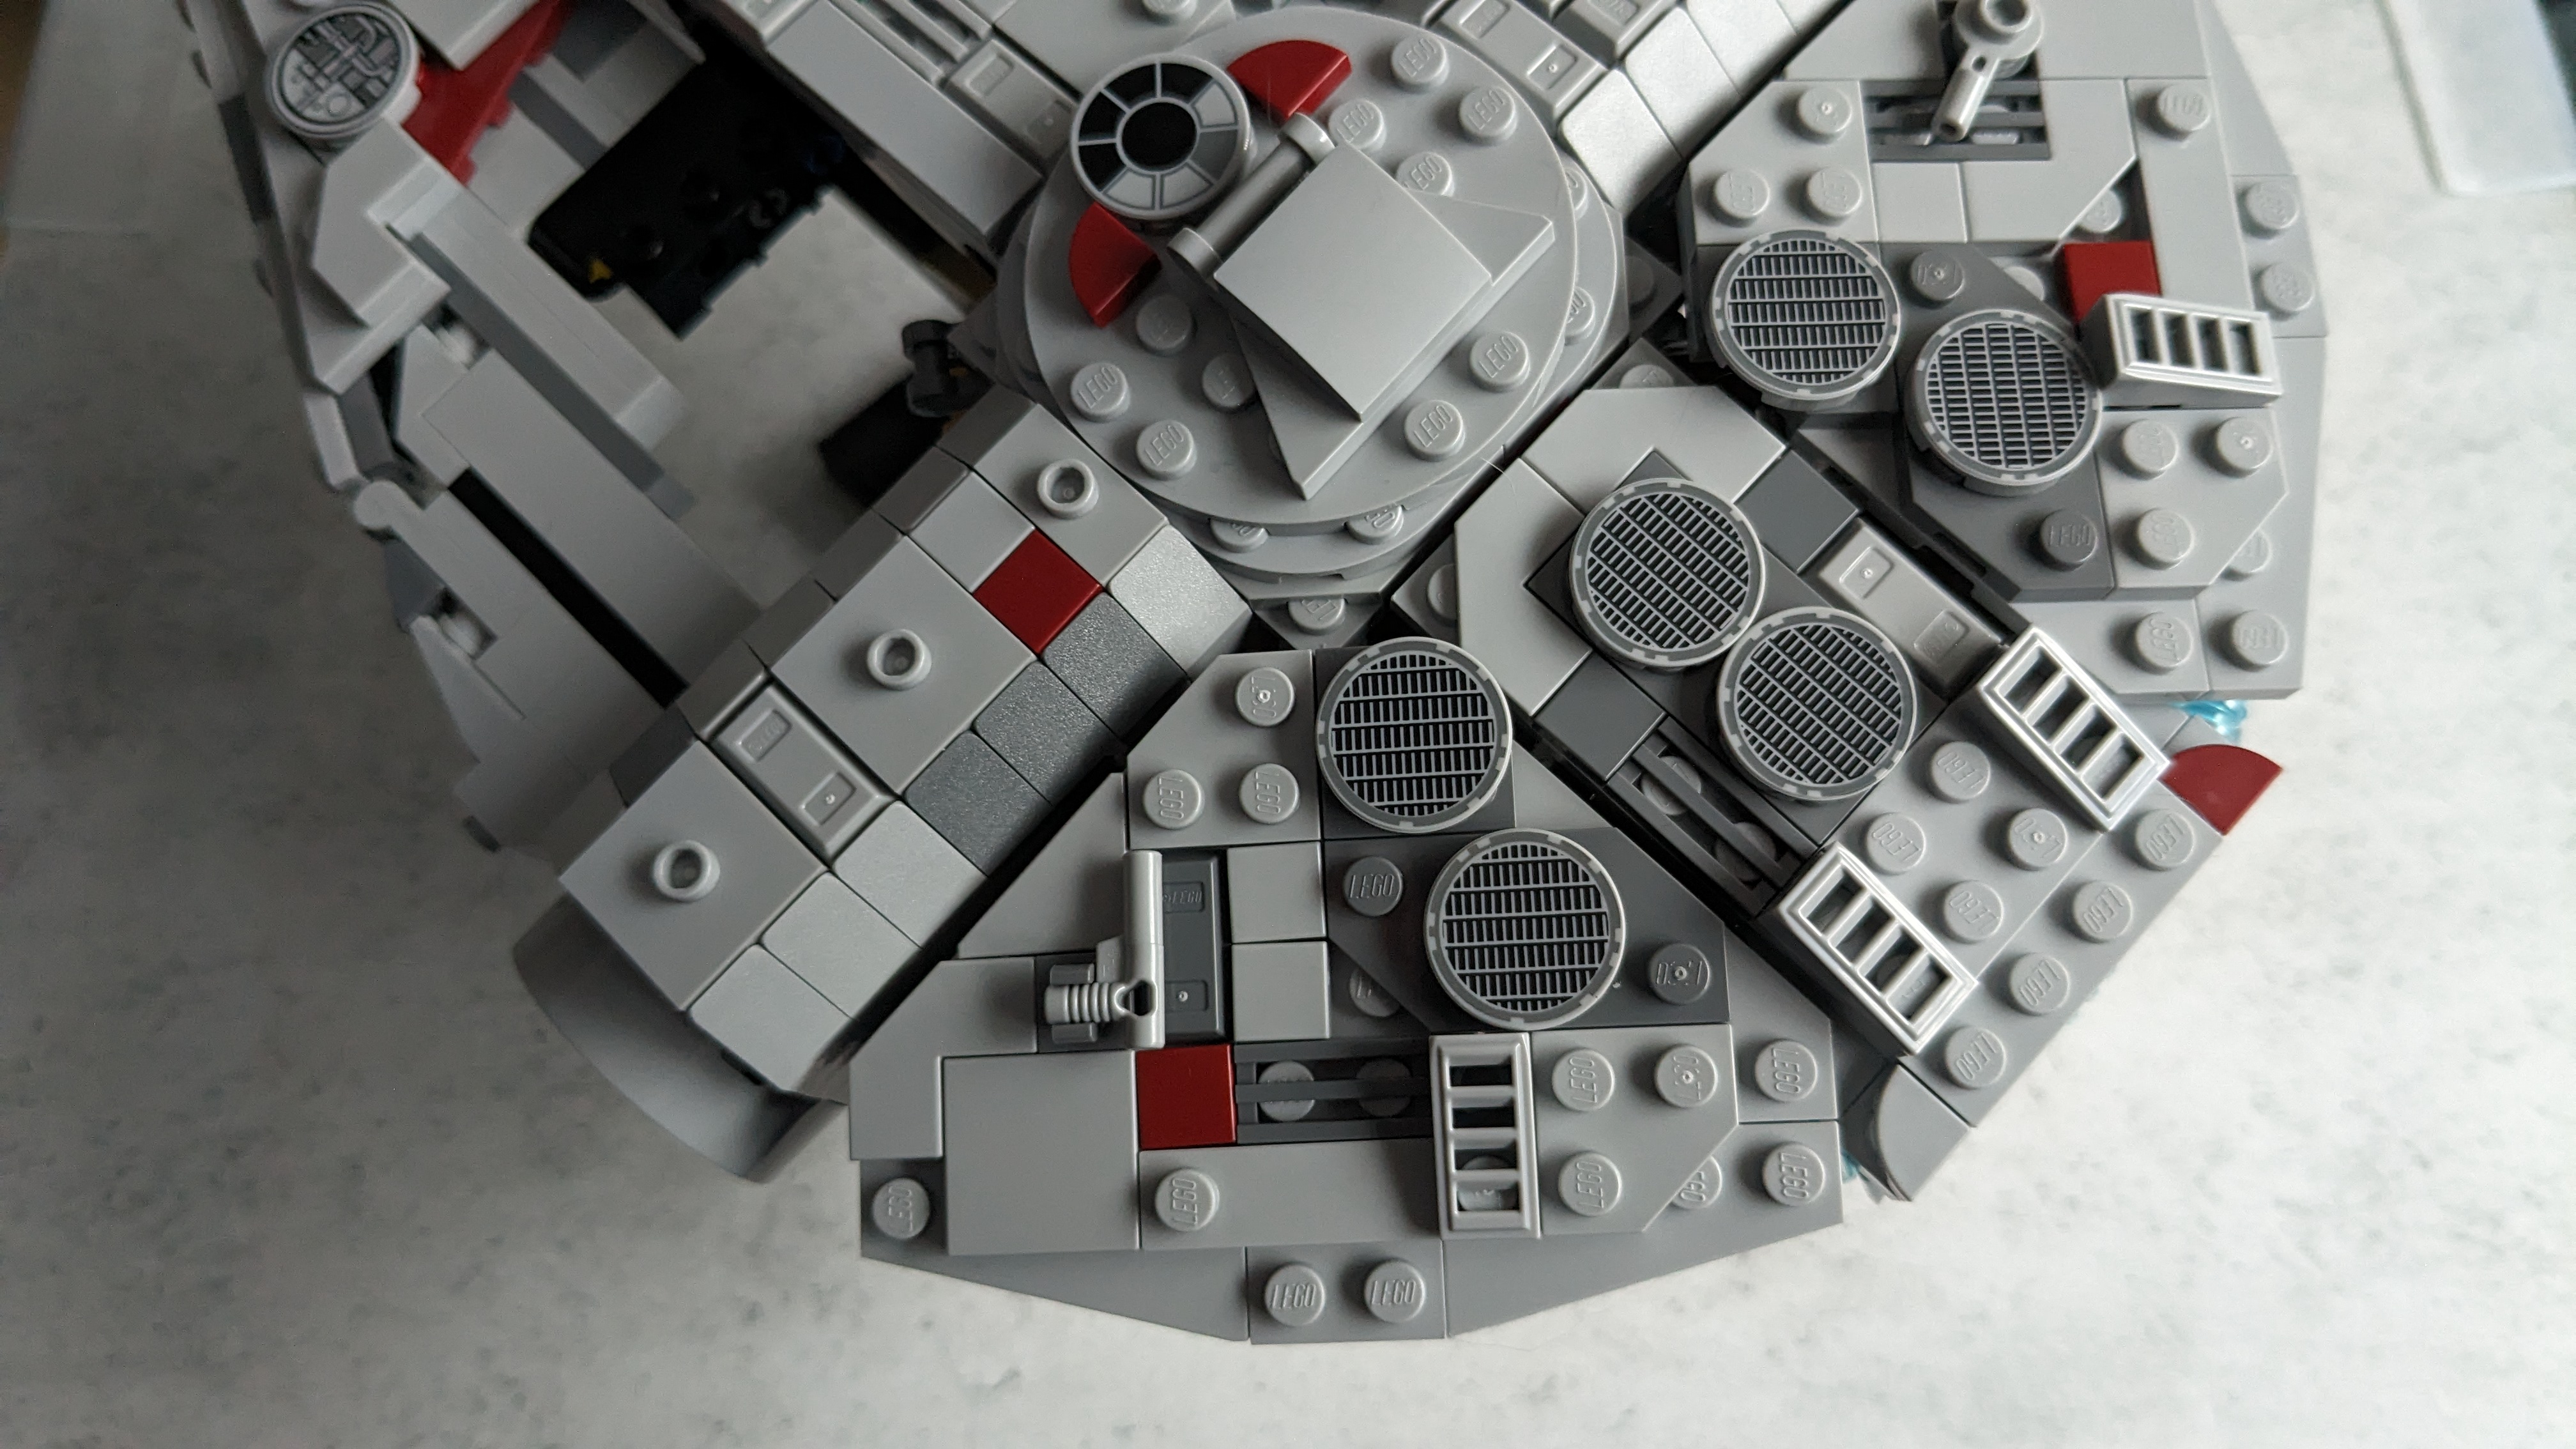 Details on top of the Millennium Falcon